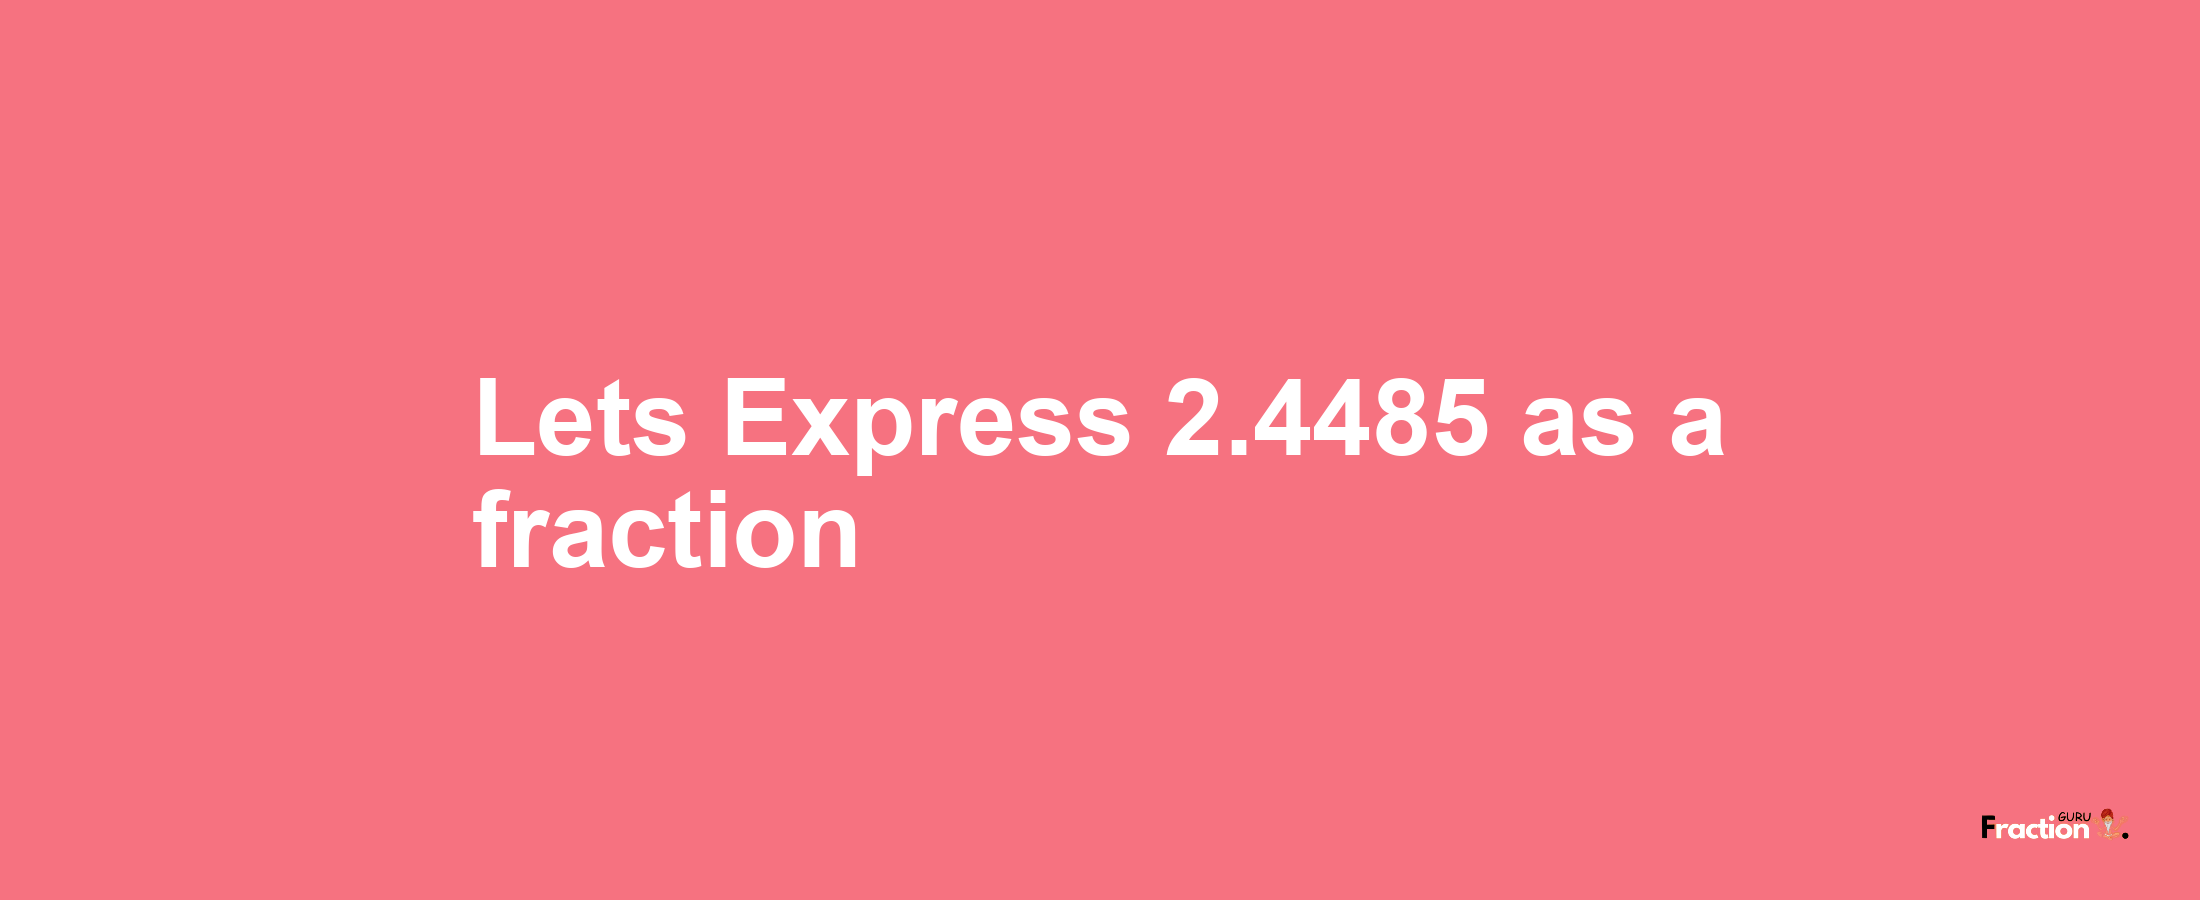 Lets Express 2.4485 as afraction